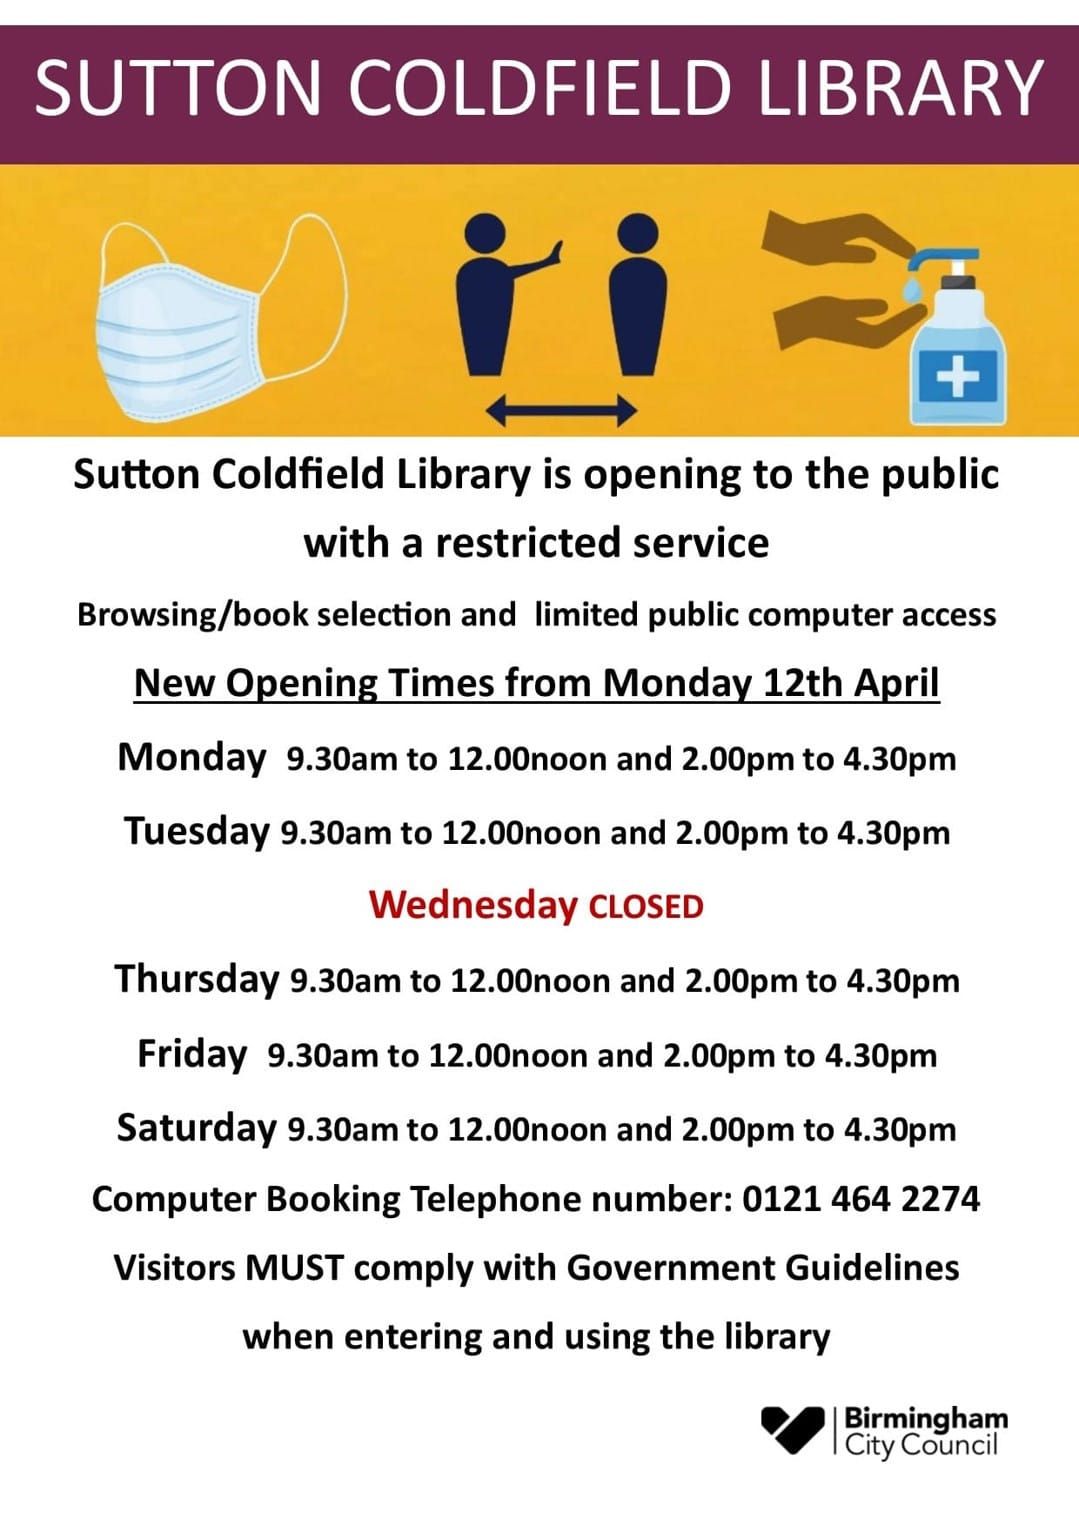 Sutton Coldfield Library Revised Opening